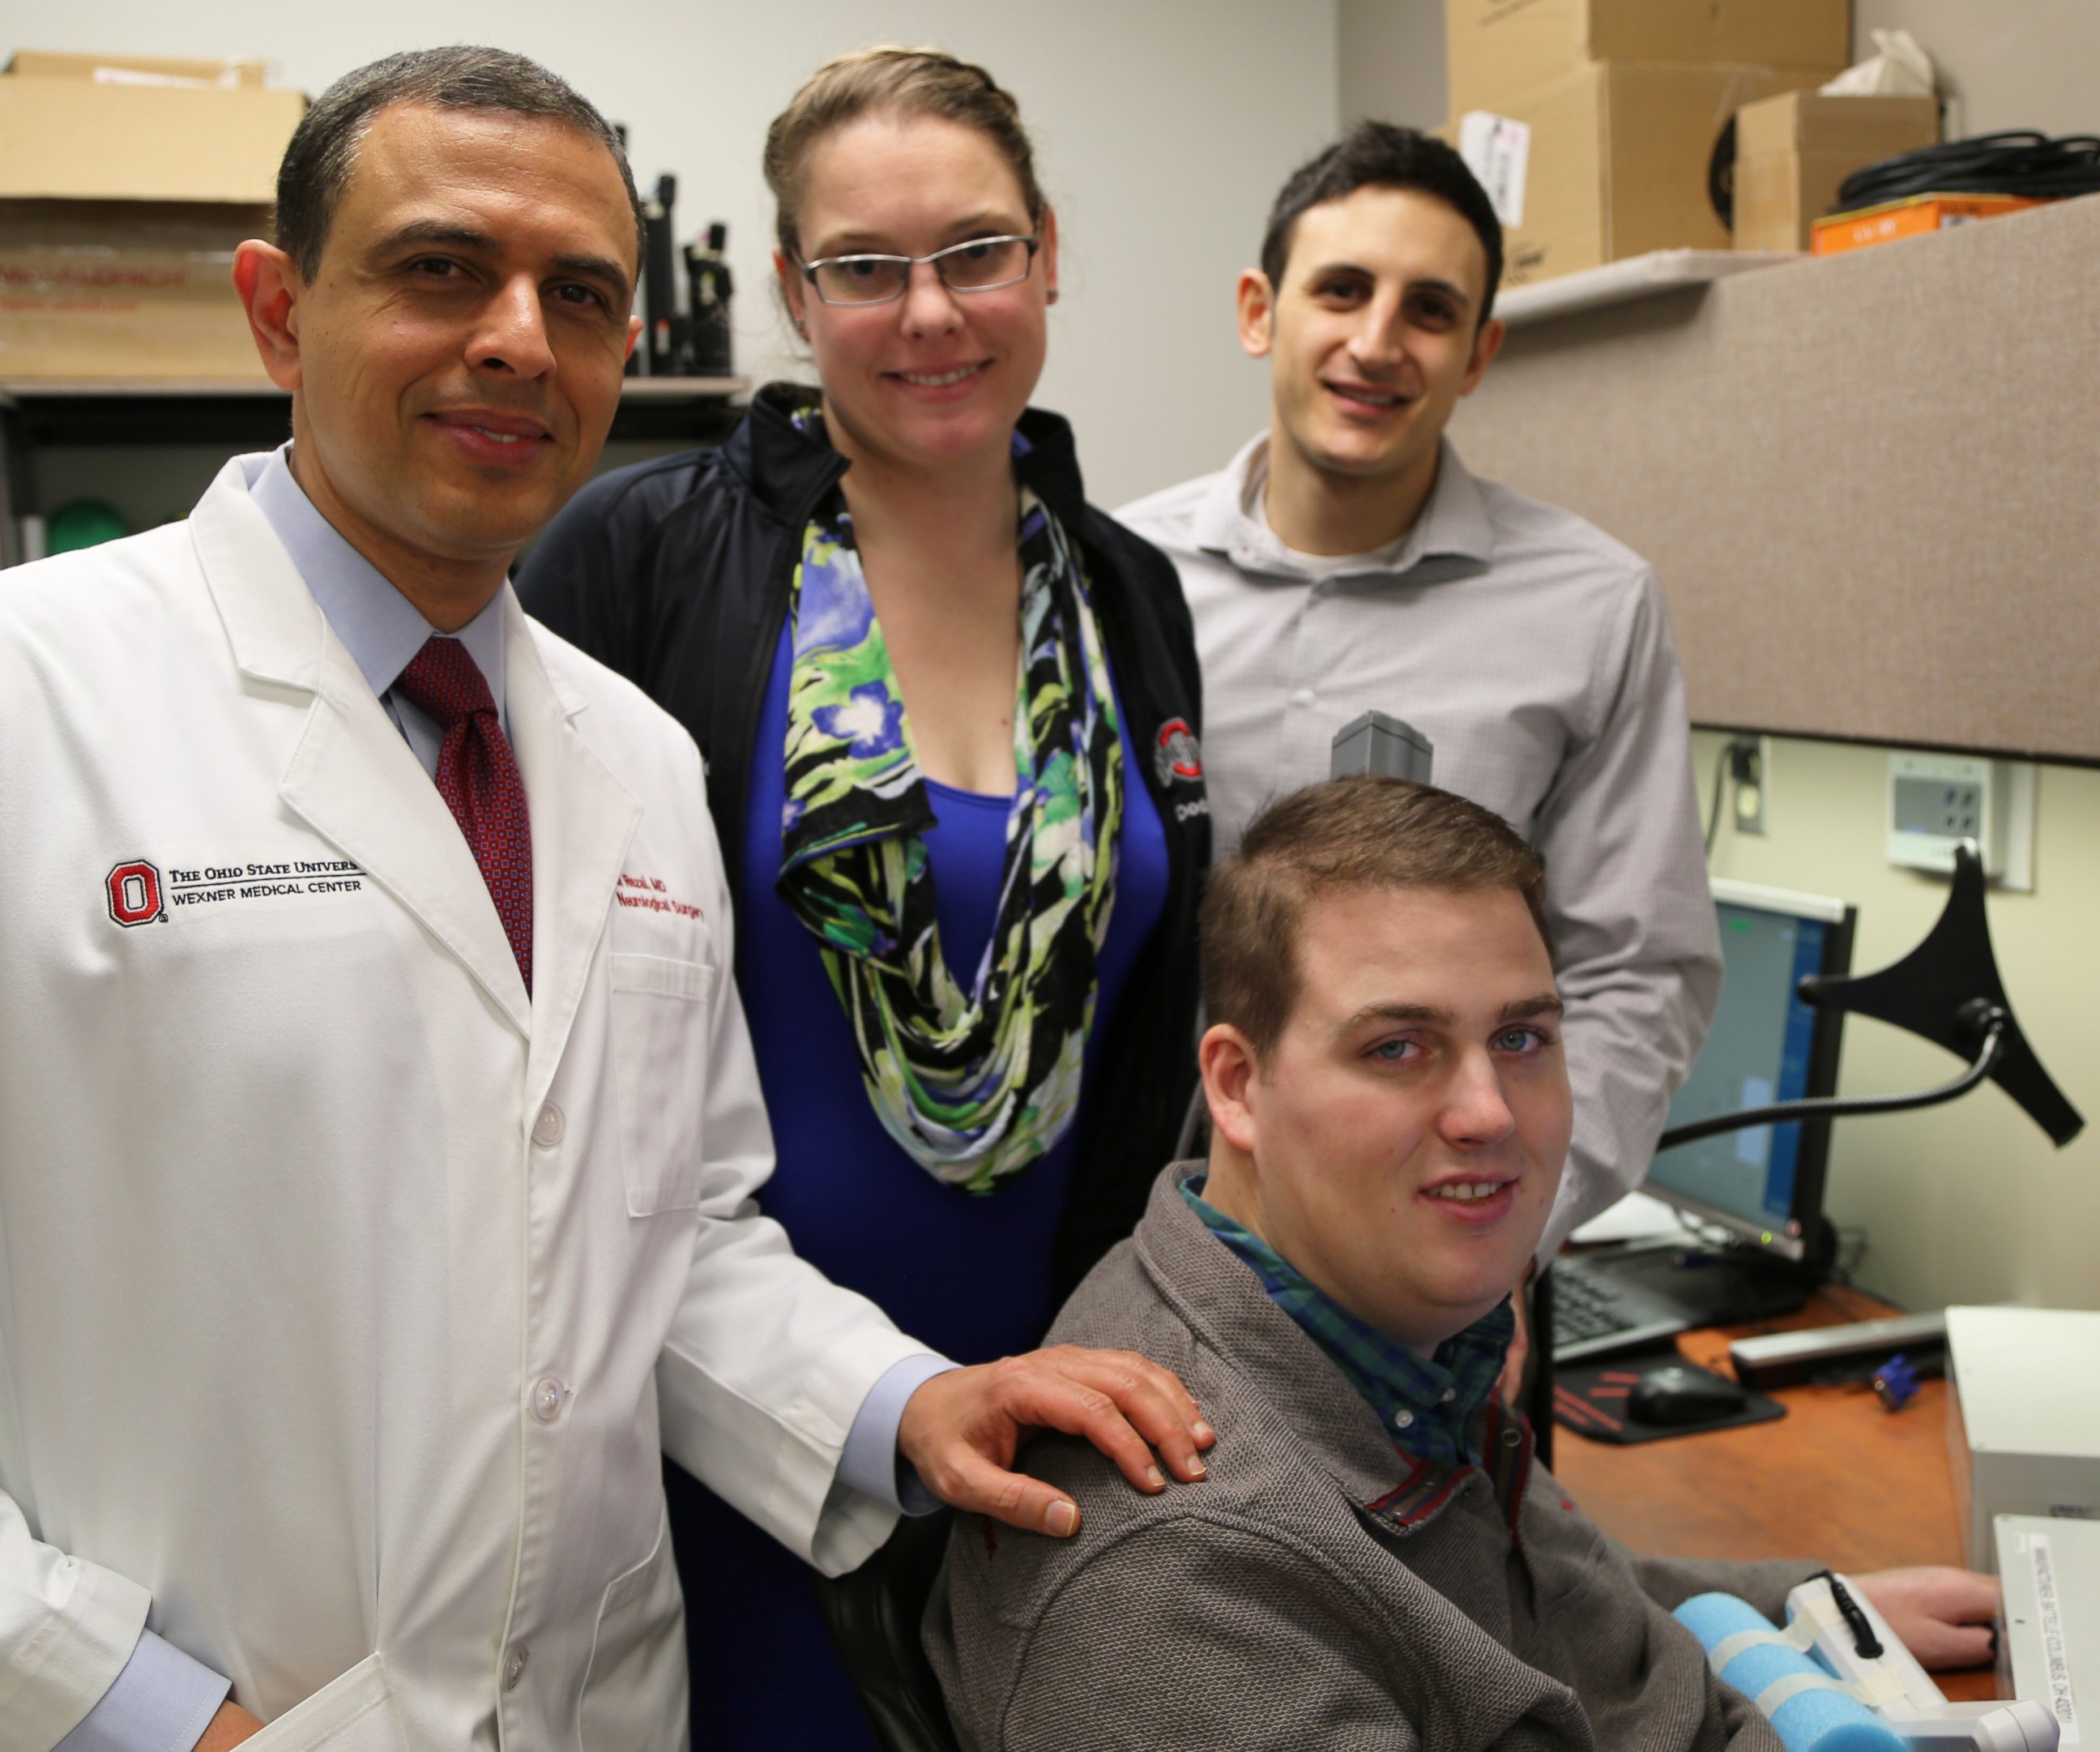 PHOTO: Patient Ian Burkhart, seated, poses with members of the research team. from left, Dr. Ali Rezai and Dr. Marcie Bockbrader of The Ohio State University Wexner Medical Center and Nick Annetta of Battelle during a neural bypass training session.